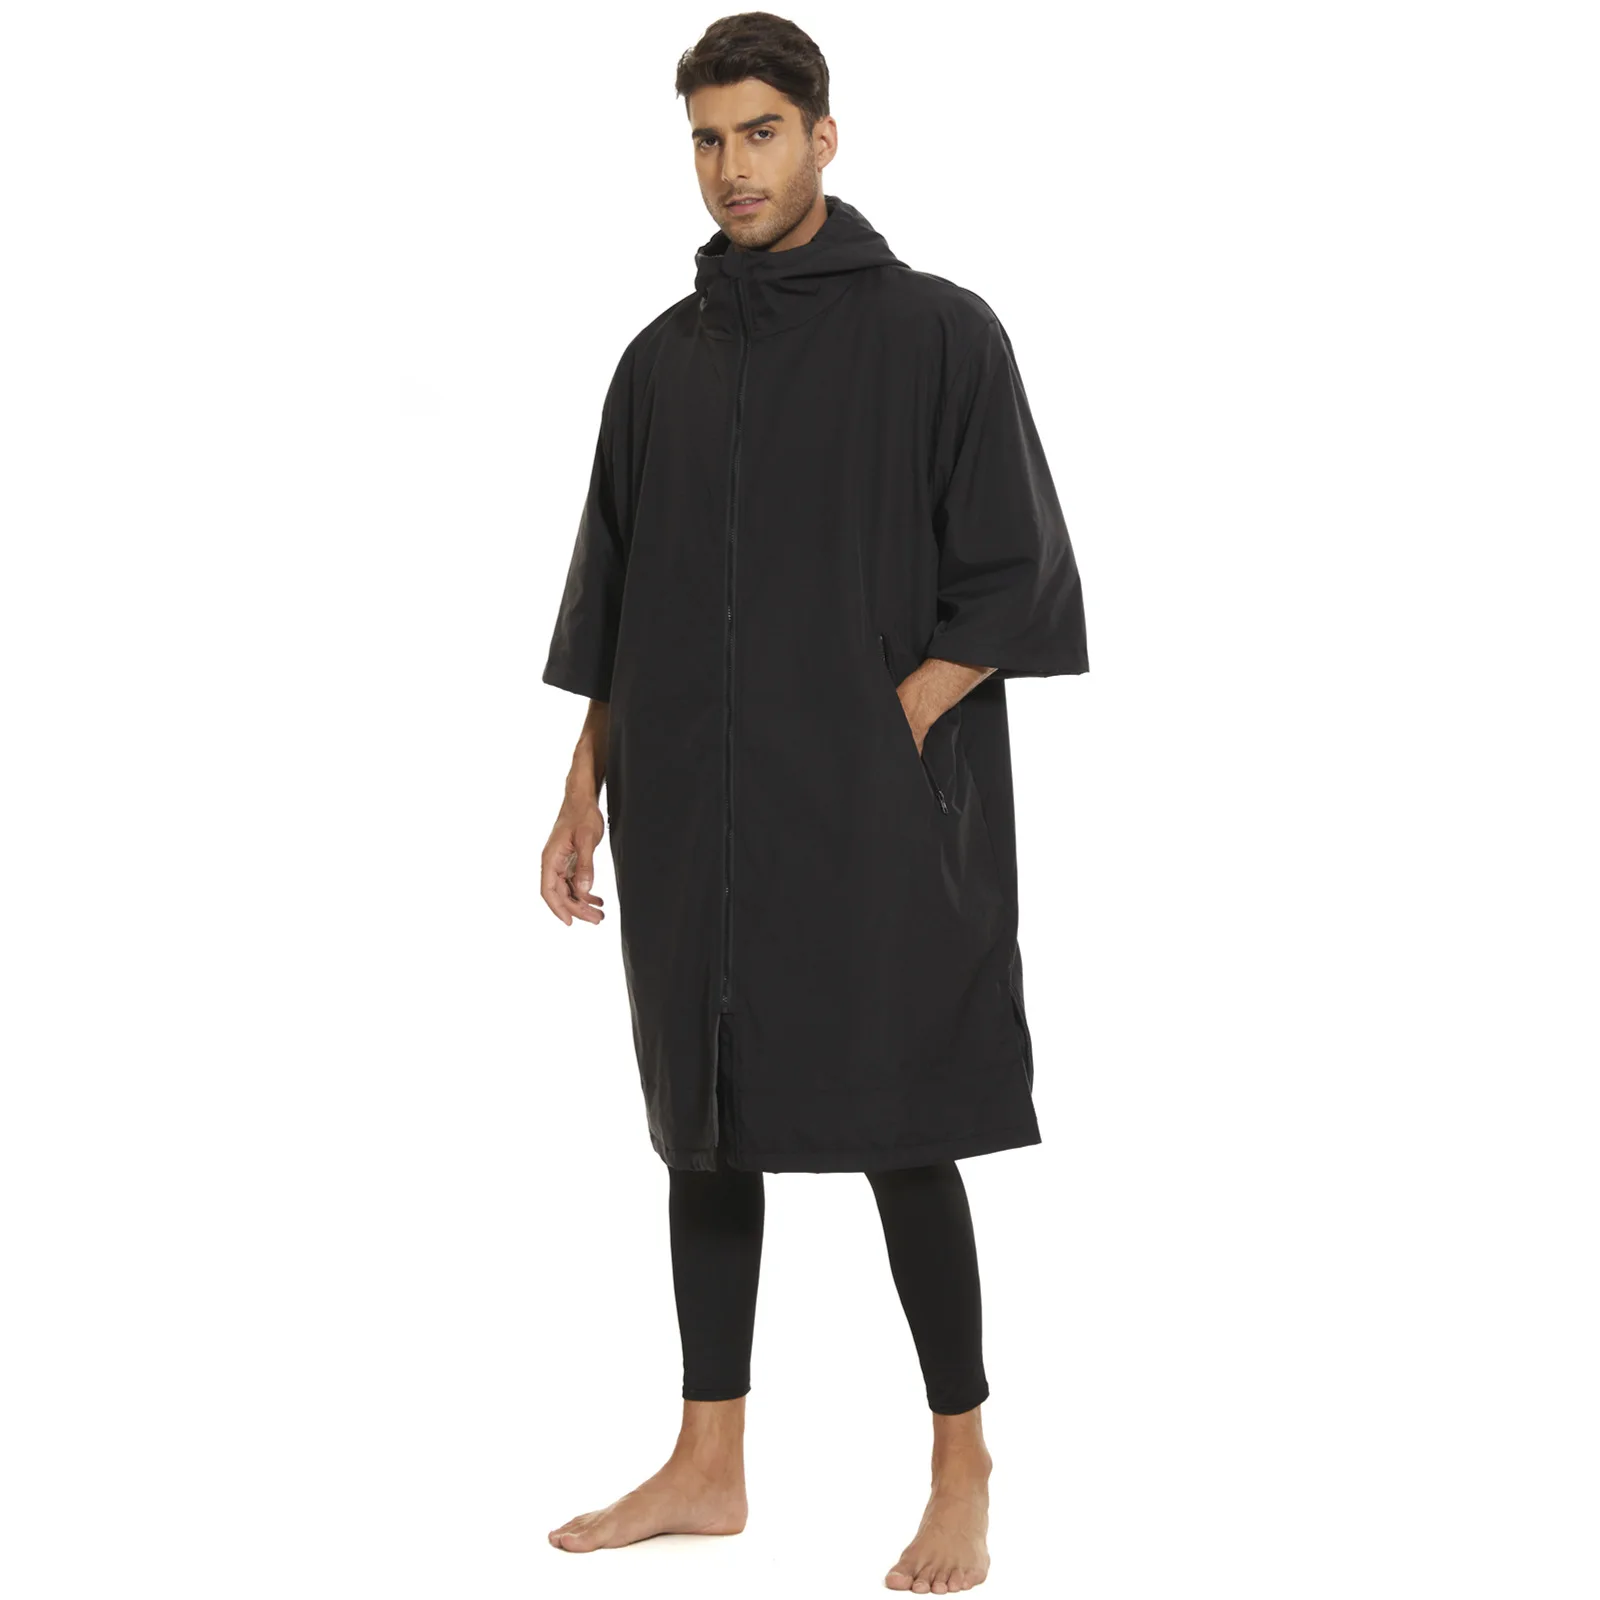 oversize-hoodied-drying-robe-black-winter-warm-waterproof-changing-ponchos-with-synthetic-lambswool-outdoor-coat-for-man-woman